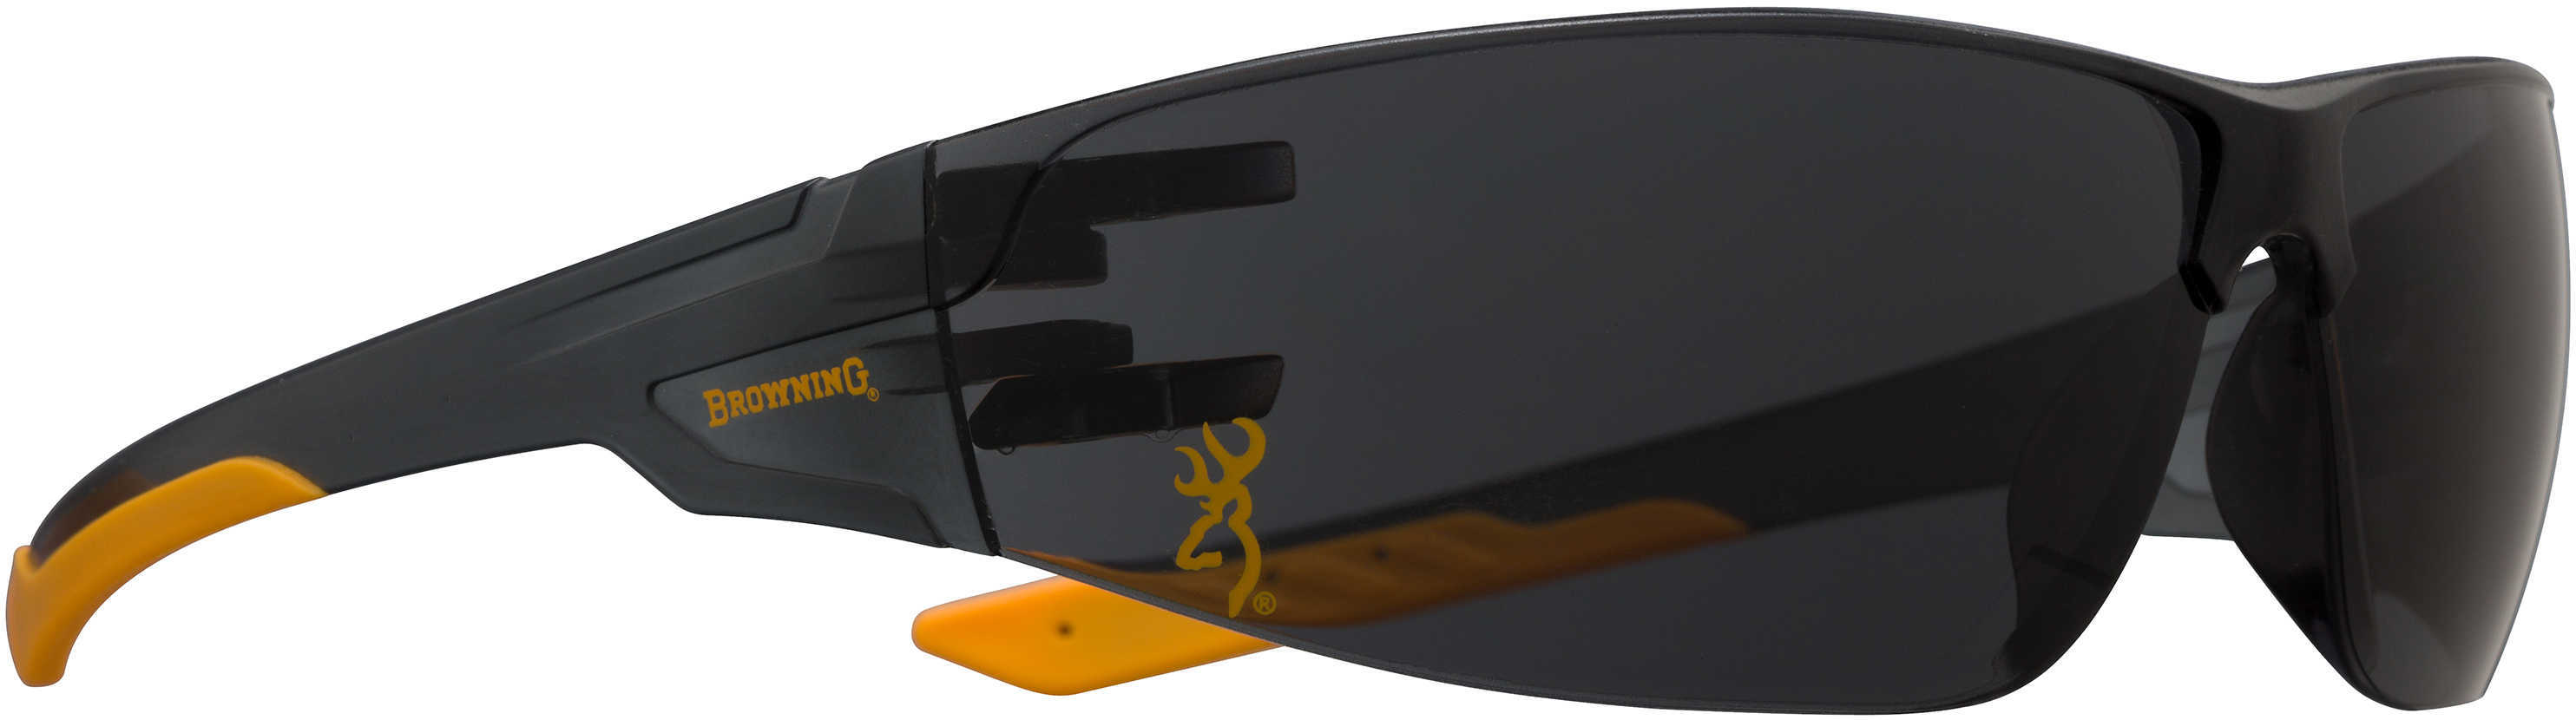 Browning Shooters Flex Glasses Tinted/Gold Md: 12762-img-1